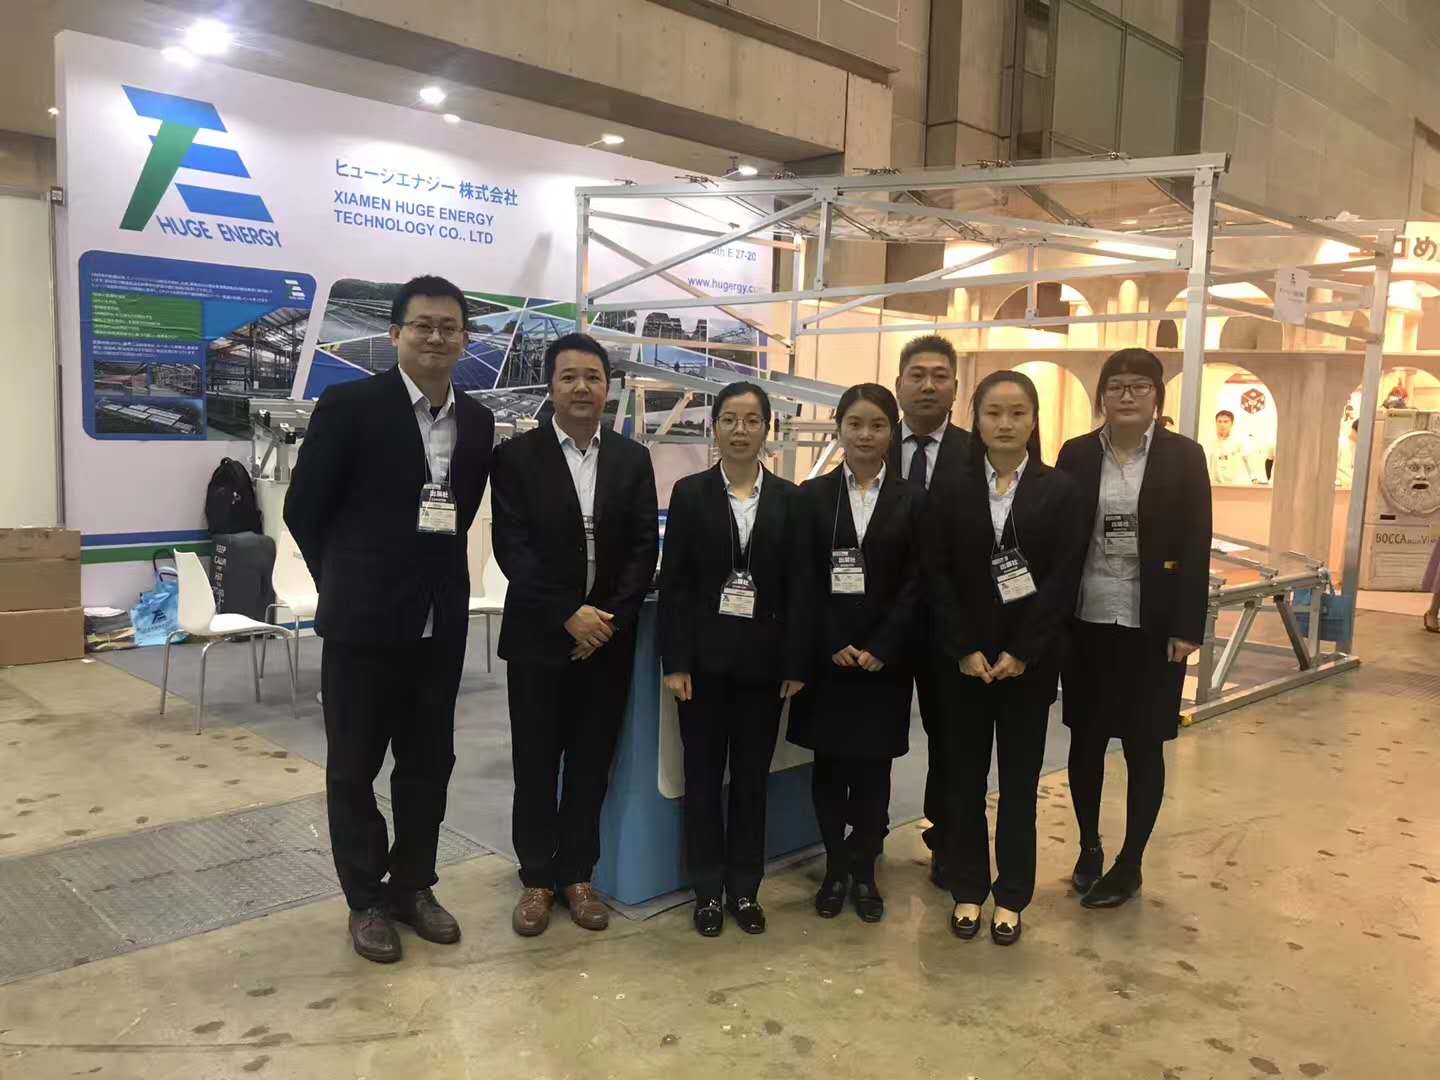 10th Solar Power System Construction Exhibition” in Tokyo, Japan